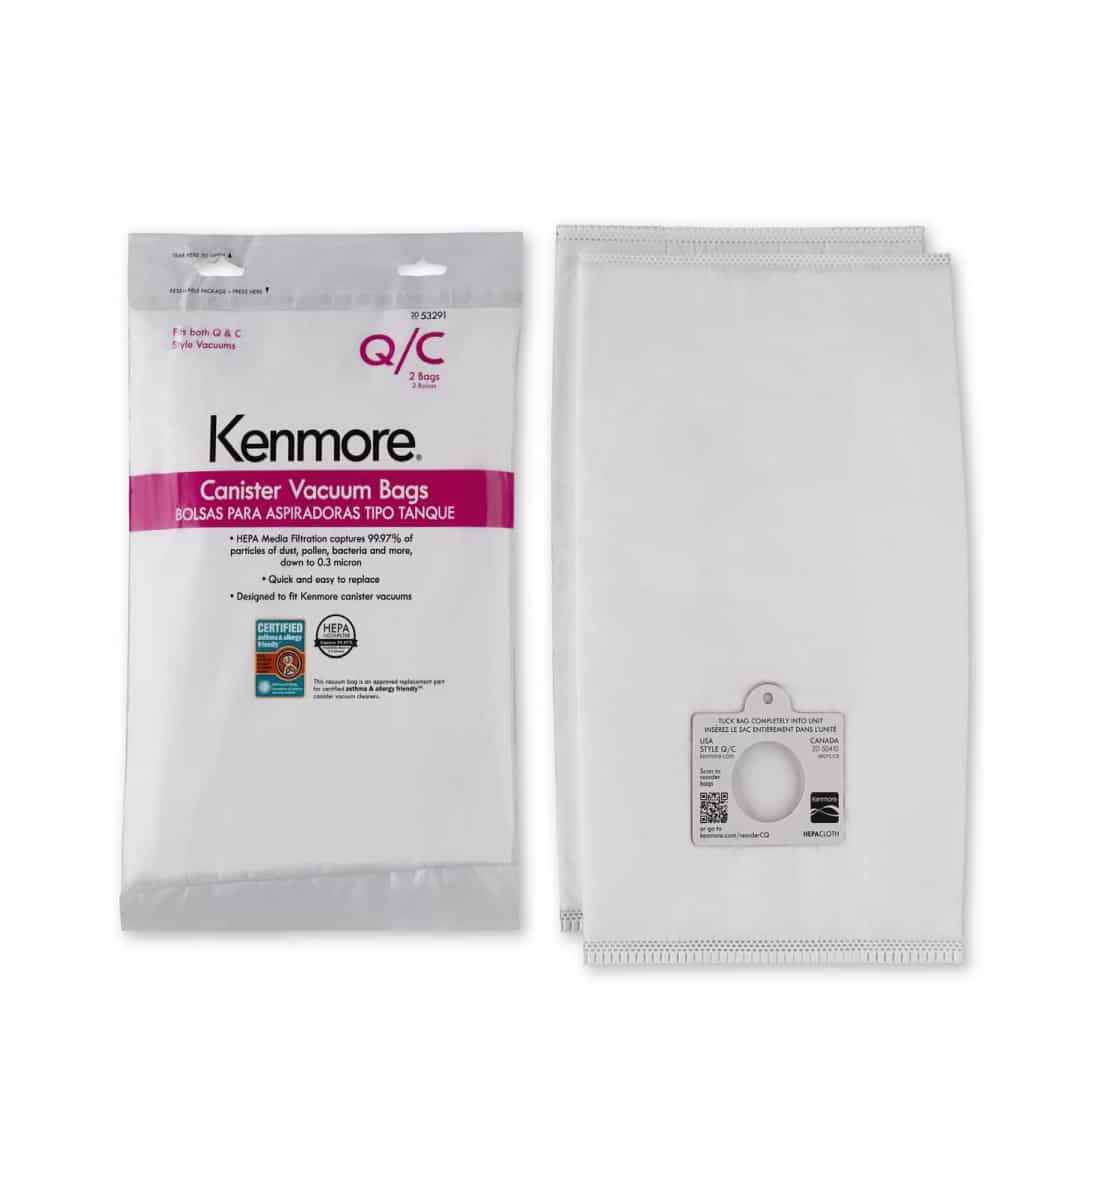 Kenmore 53291 Q/C HEPA Vacuum Bags for Canister Vacuums, 2 Pack